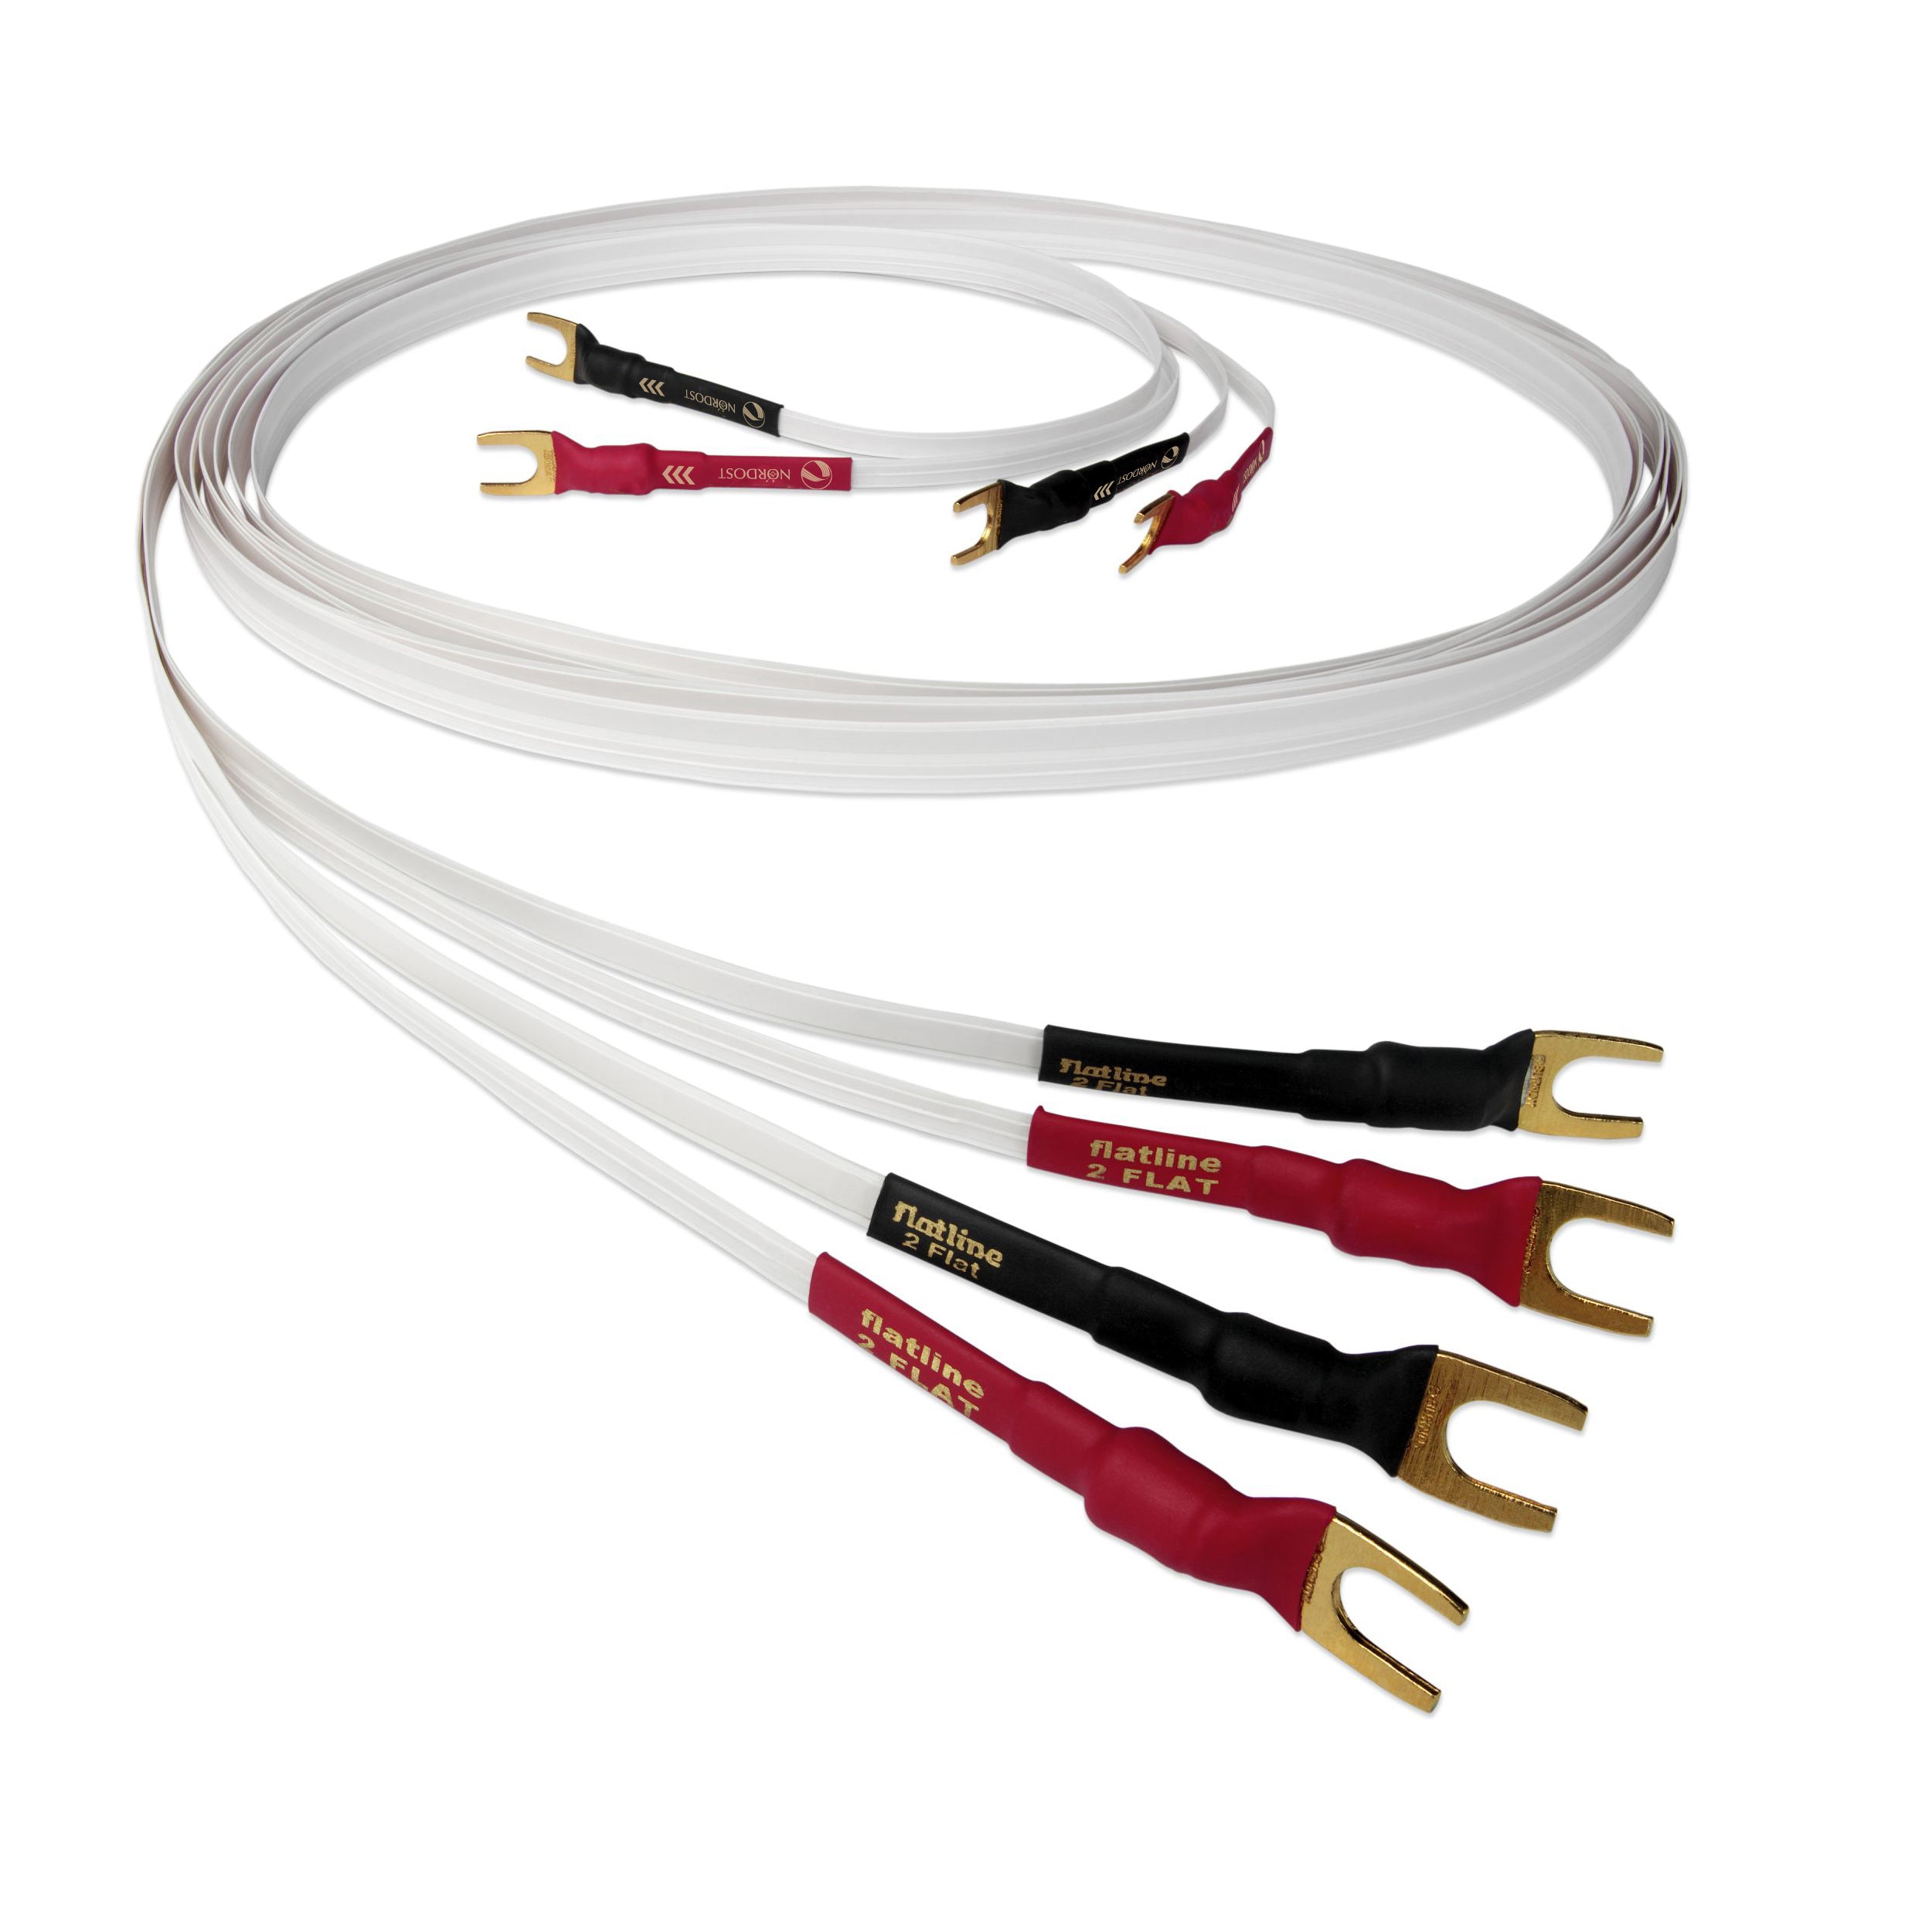 Nordost Leifstyle 2 Flat Speaker Cable